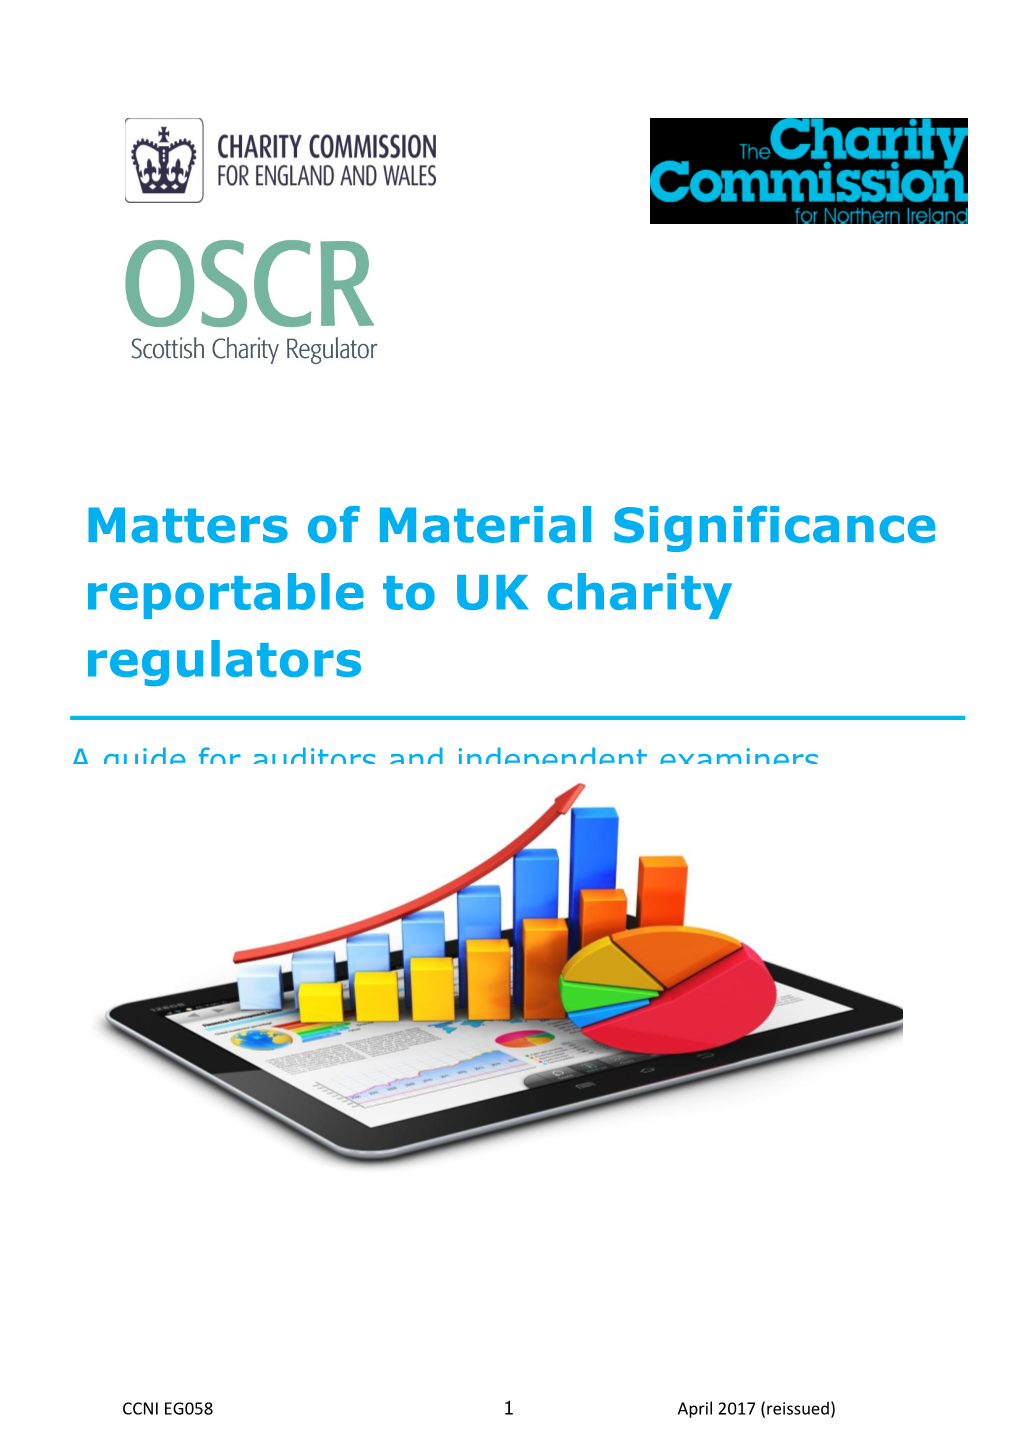 Matters of Material Significance Reportable to UK Charity Regulators